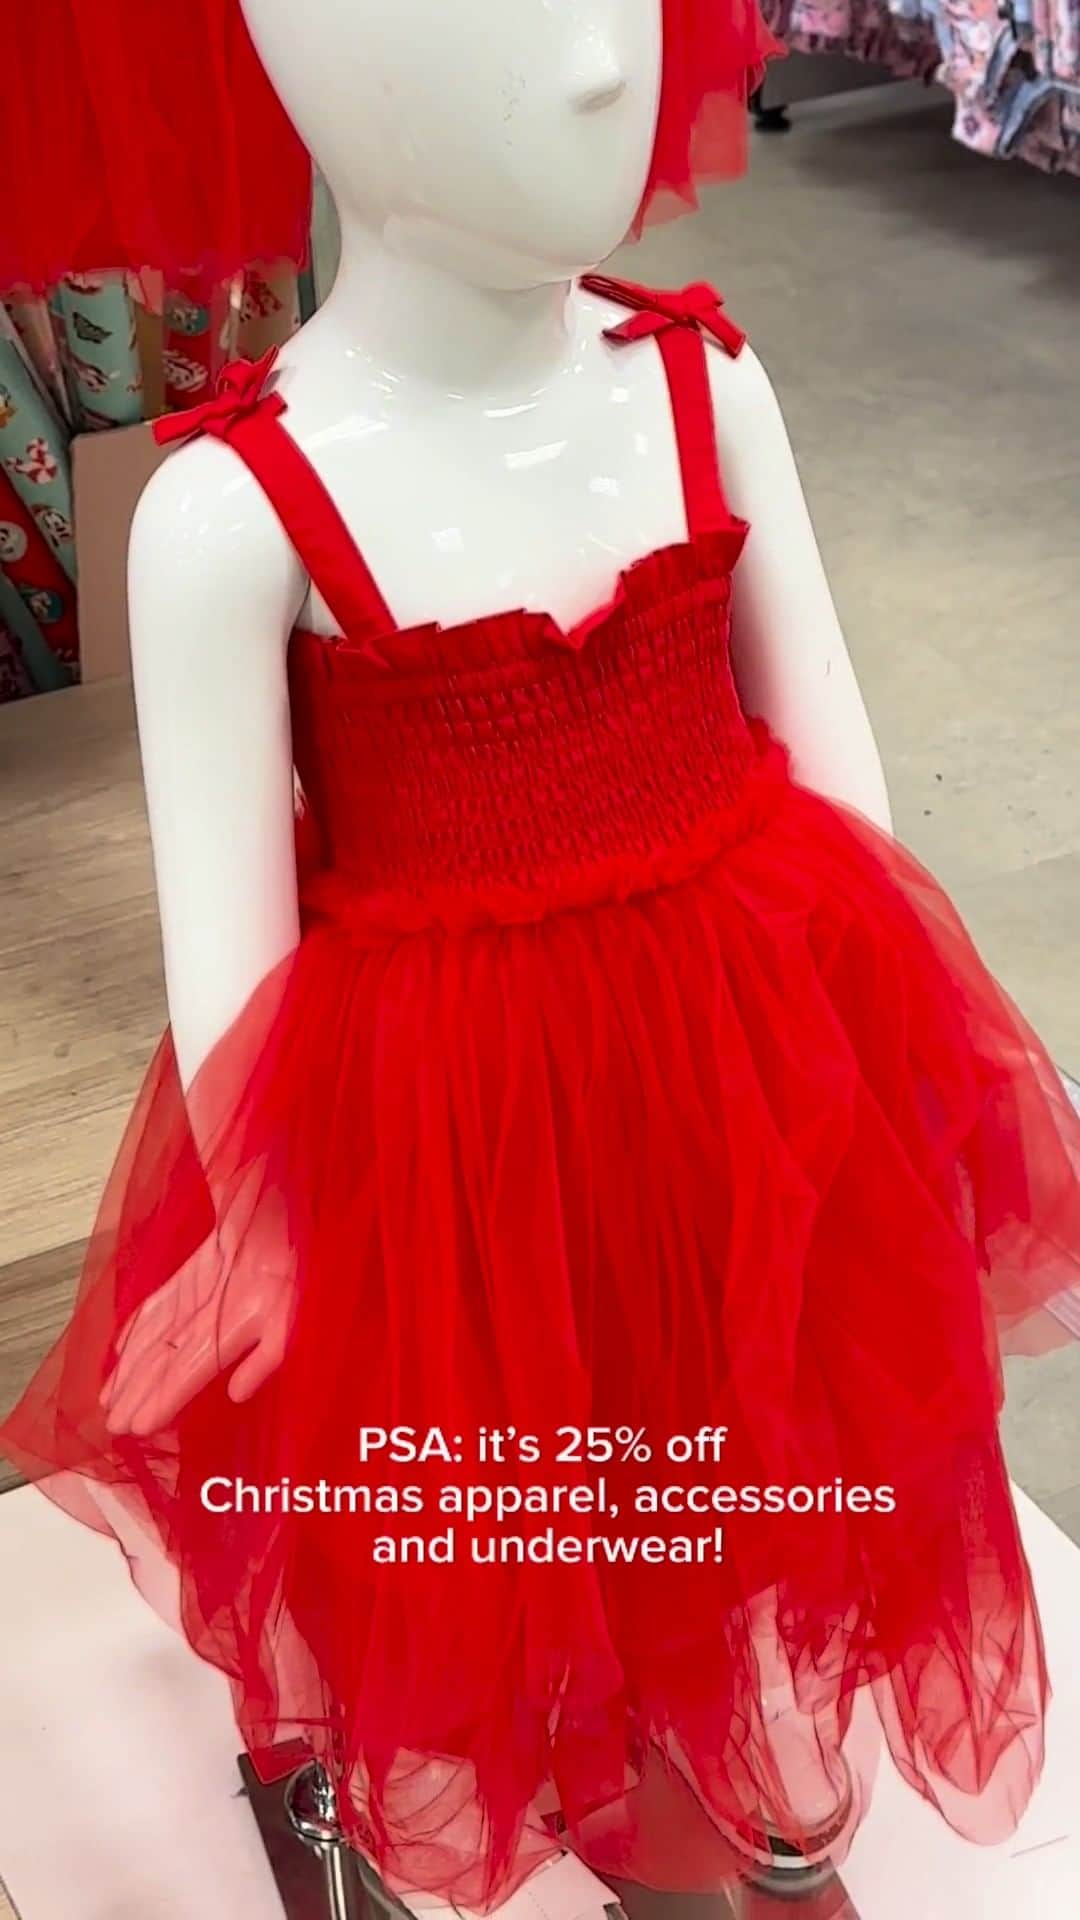 Target Australiaのインスタグラム：「PSA: we've got 25% off Christmas apparel, accessories and underwear 🎅🎄  Available online & in store. Offer ends Wednesday 13th Dec.」